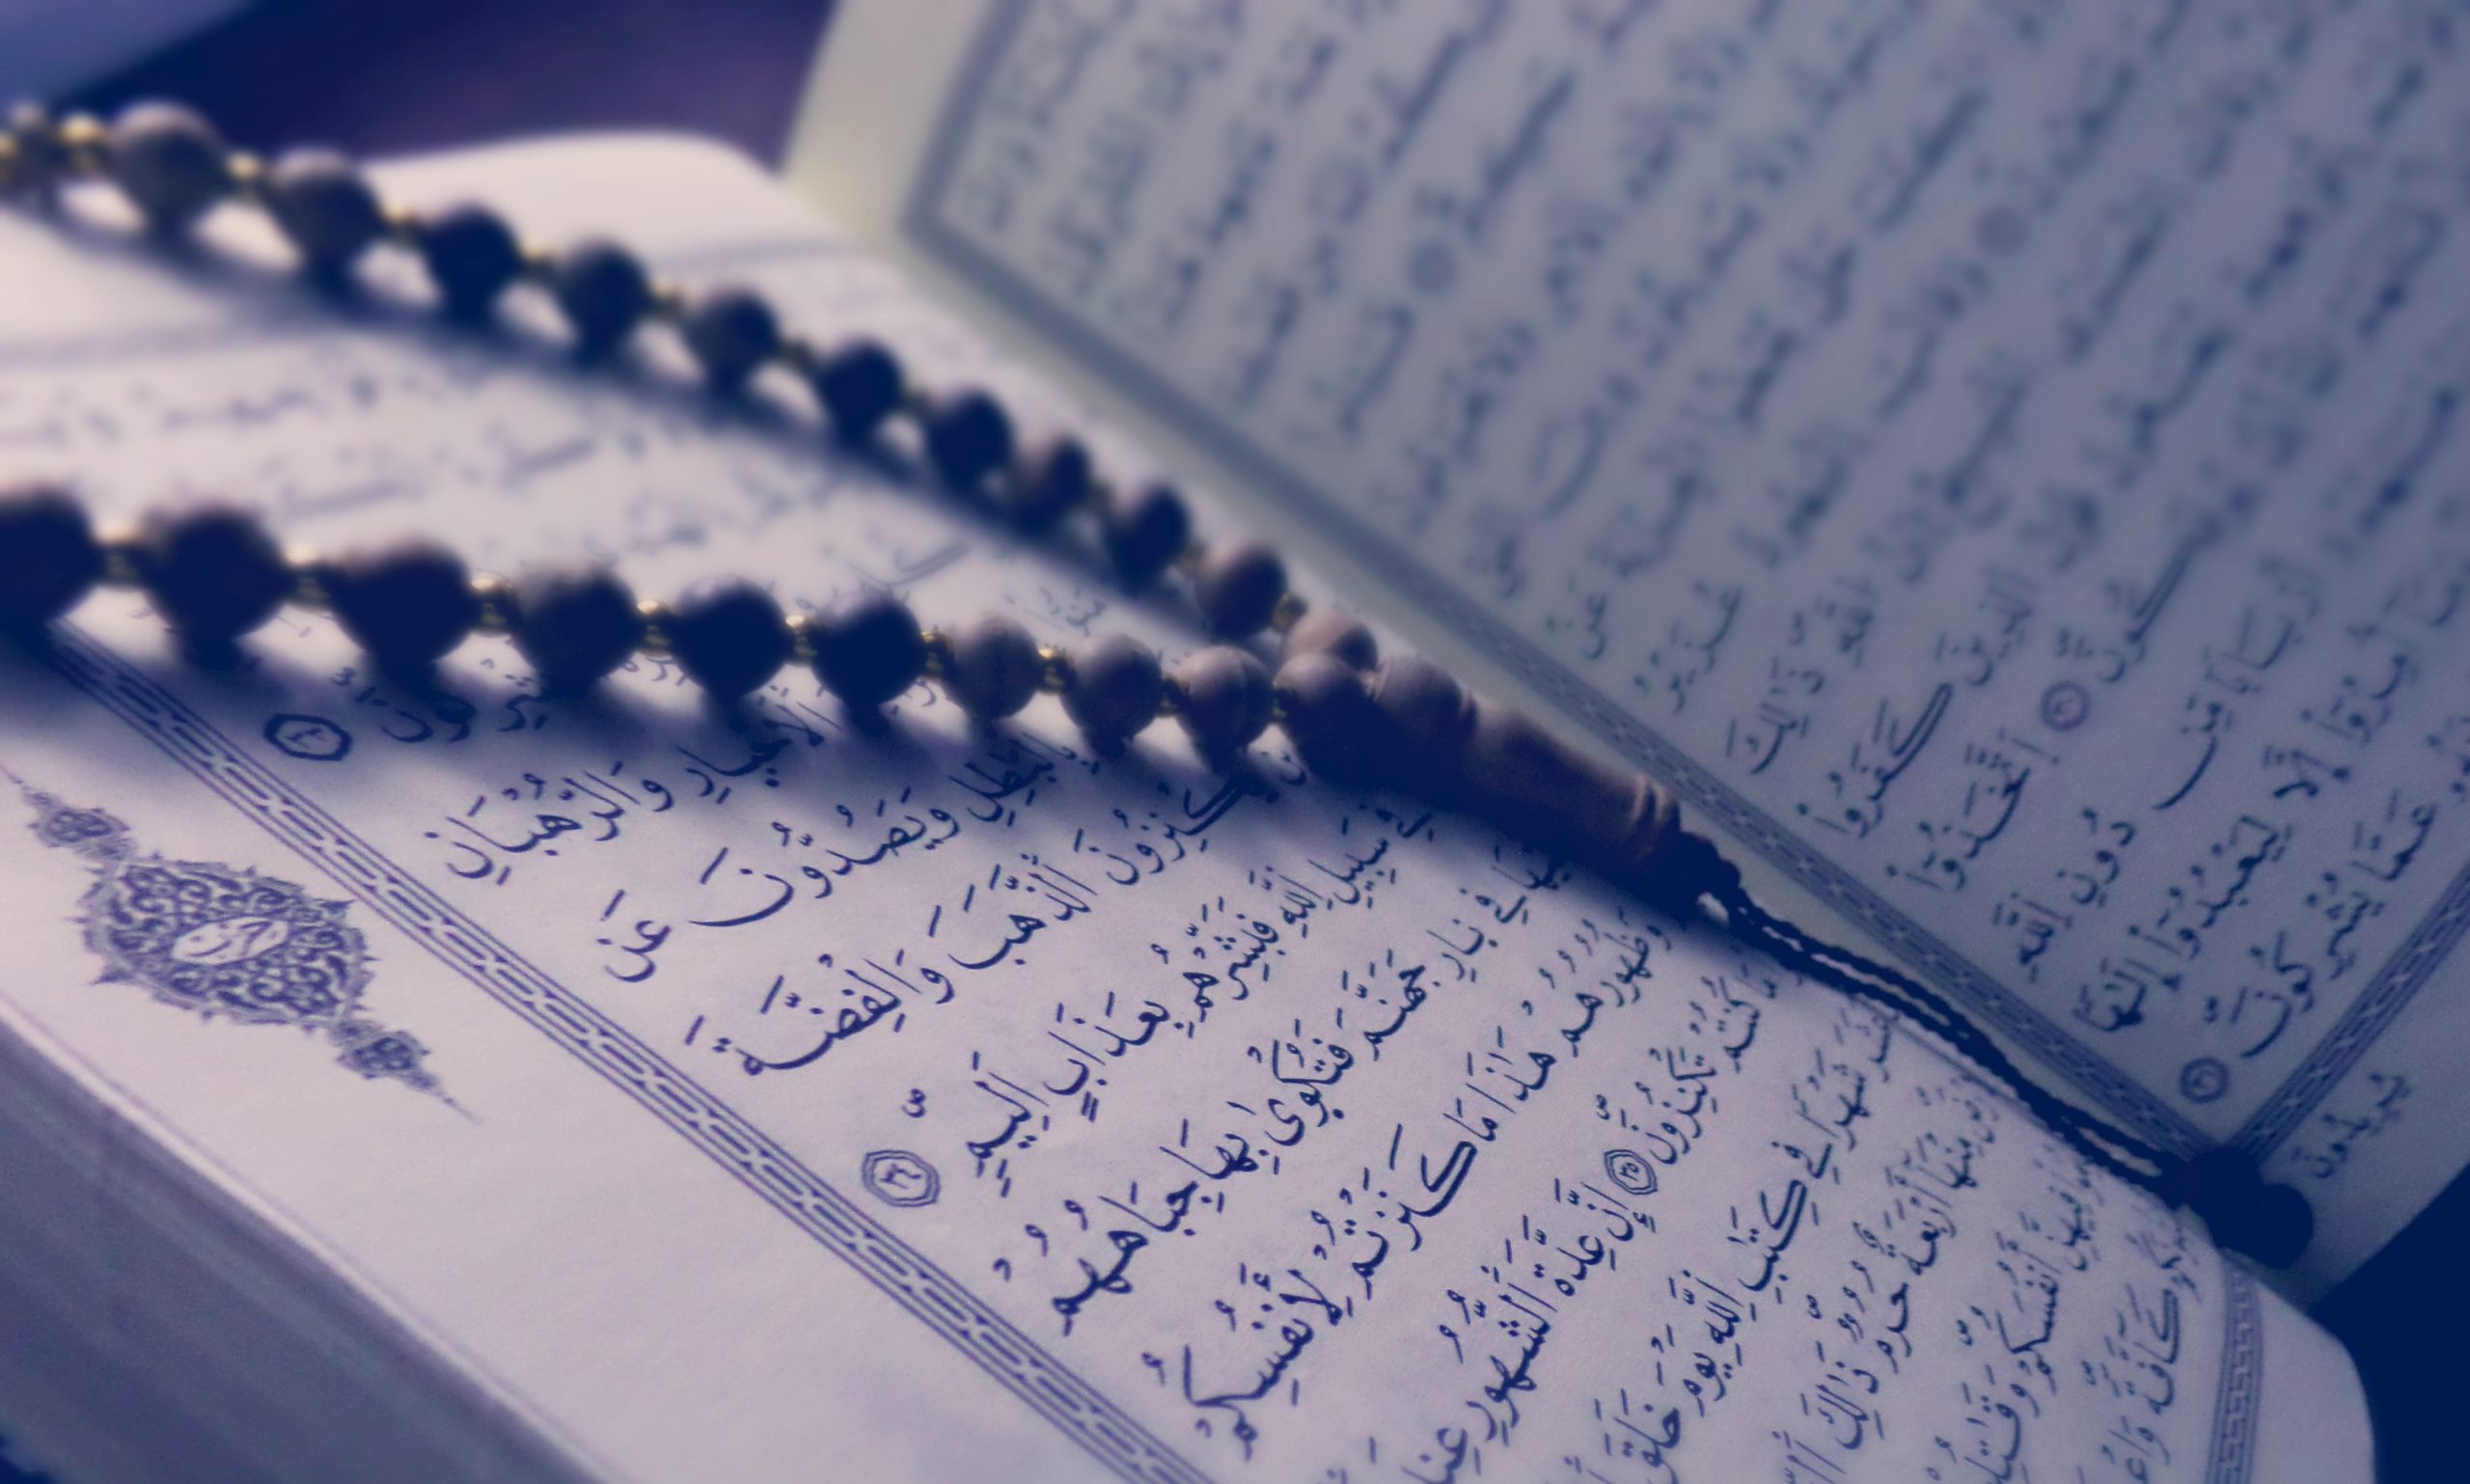 The Atlantic: Karina Piser on French call to change the Quran